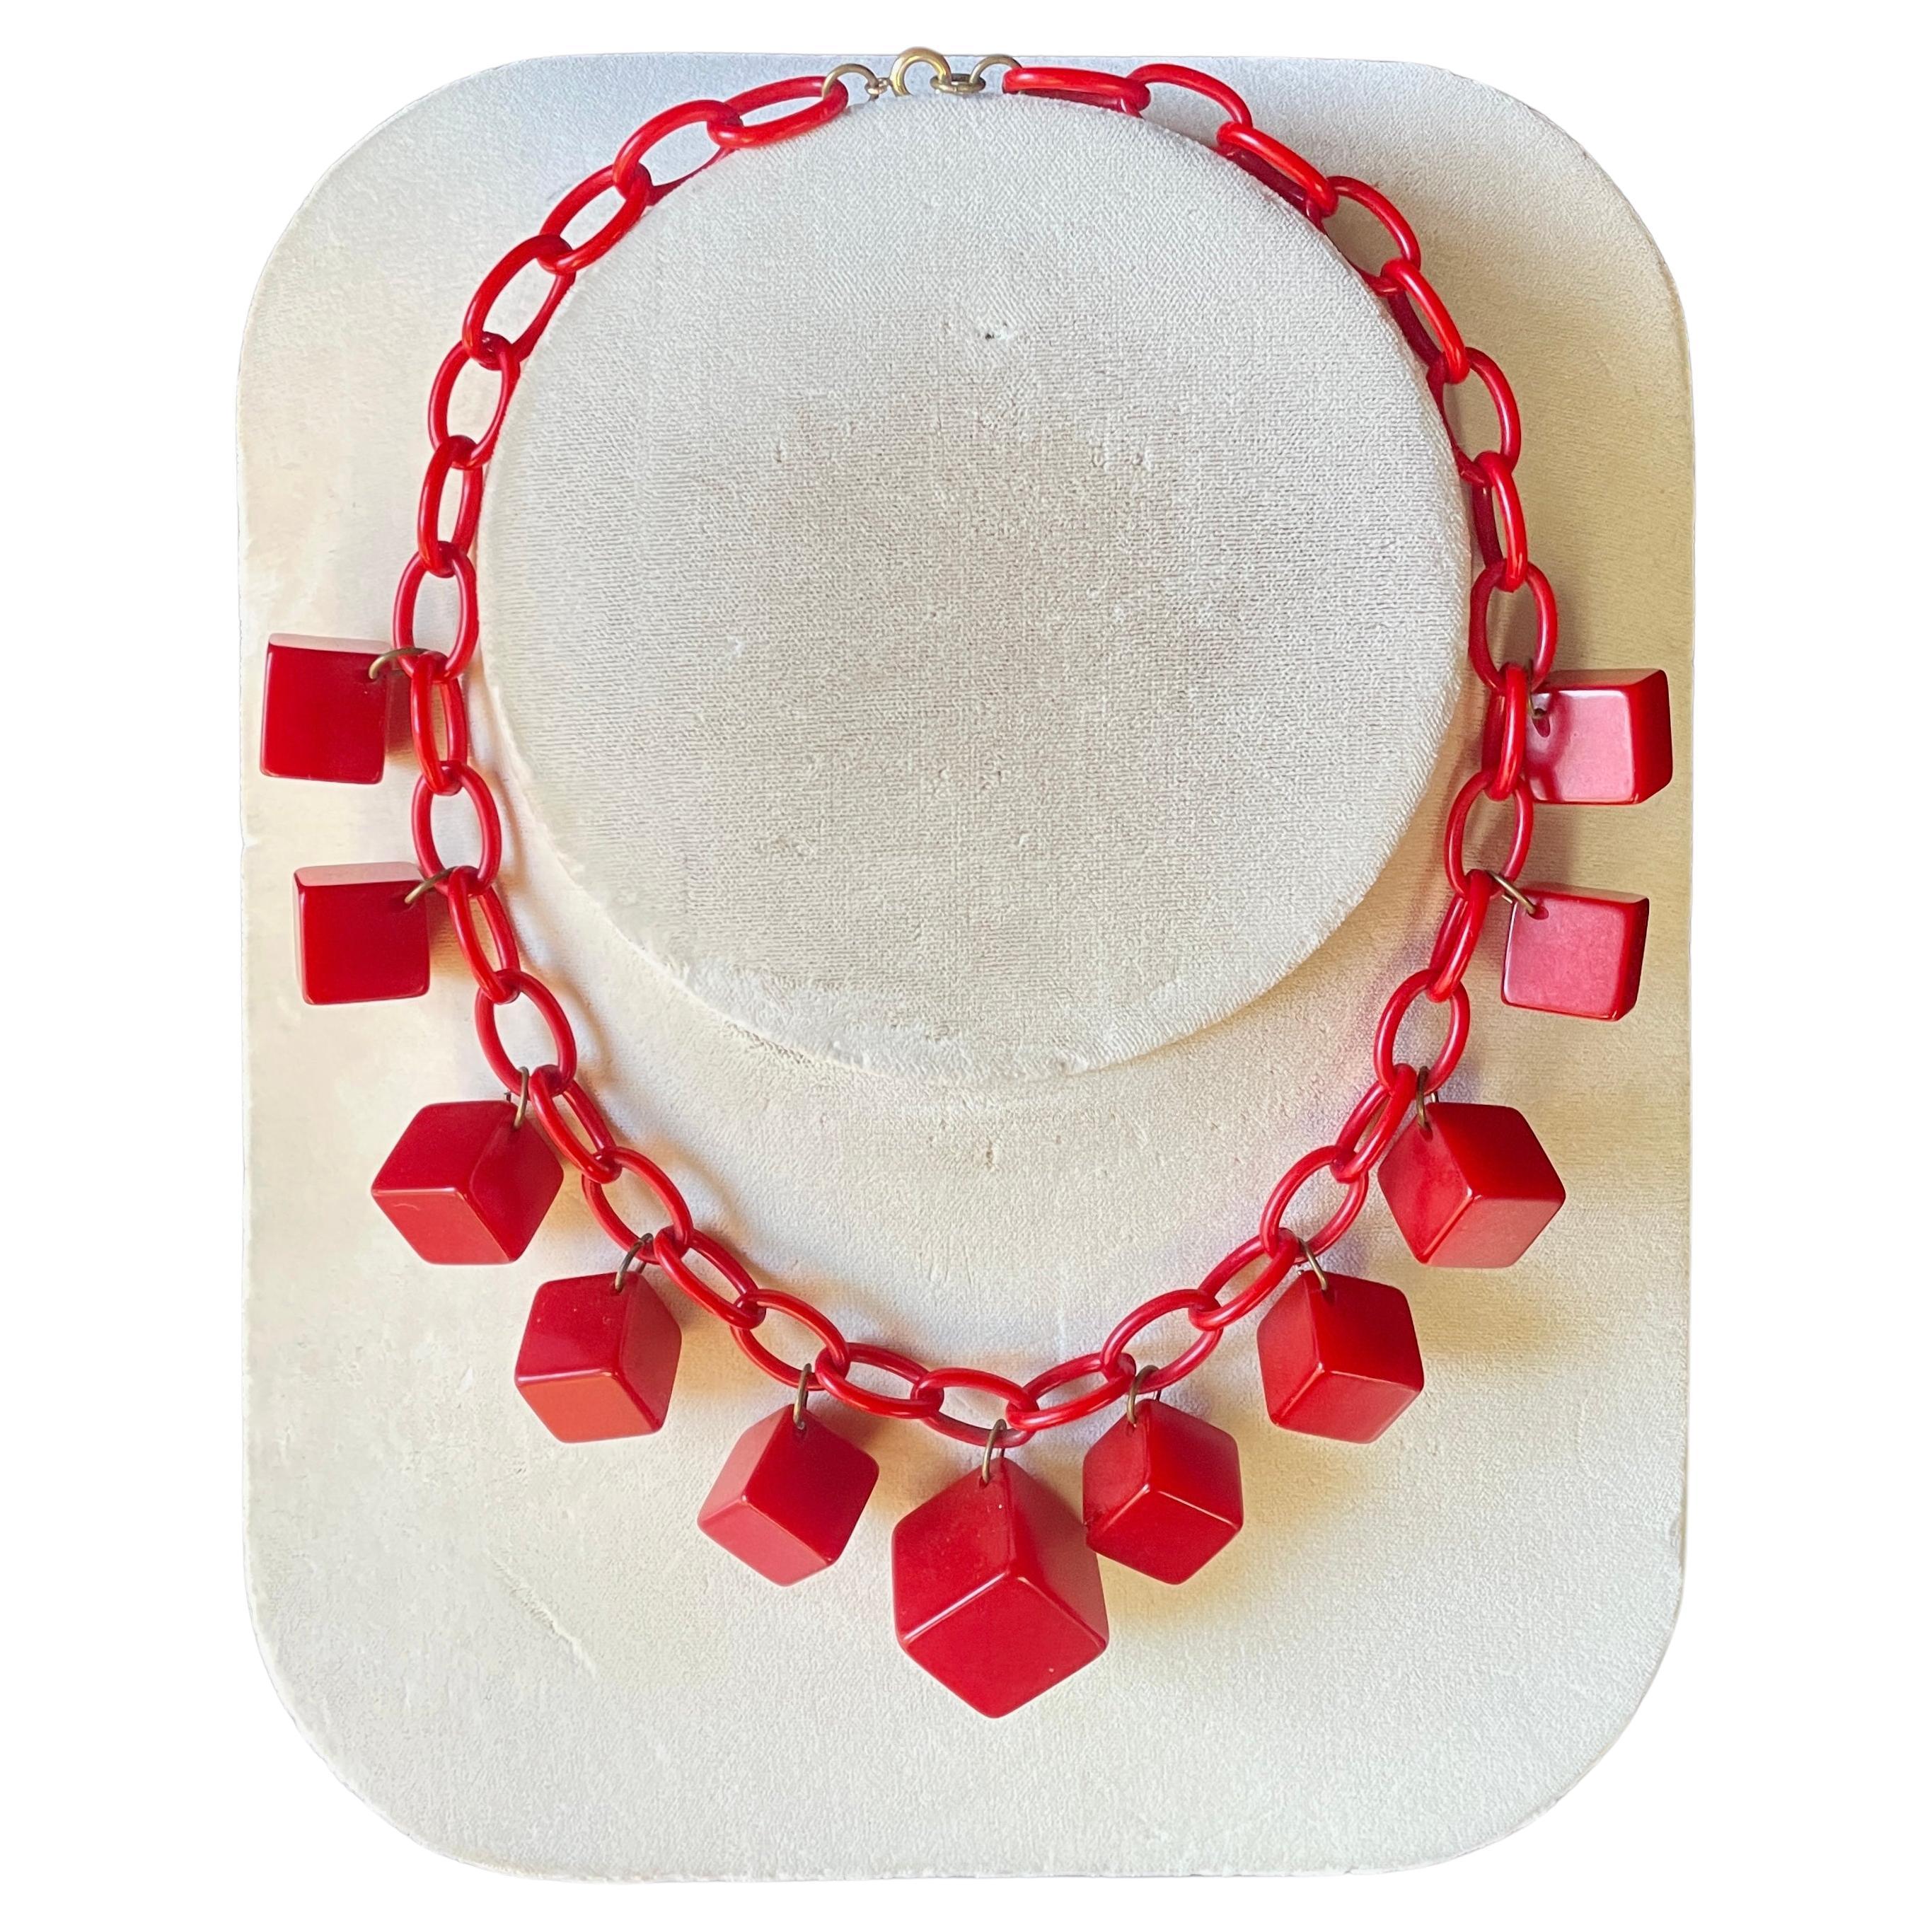 Antique Bakelite Nº11 Cubist NYC Art Deco Cherry Red Charm Necklace  For Sale